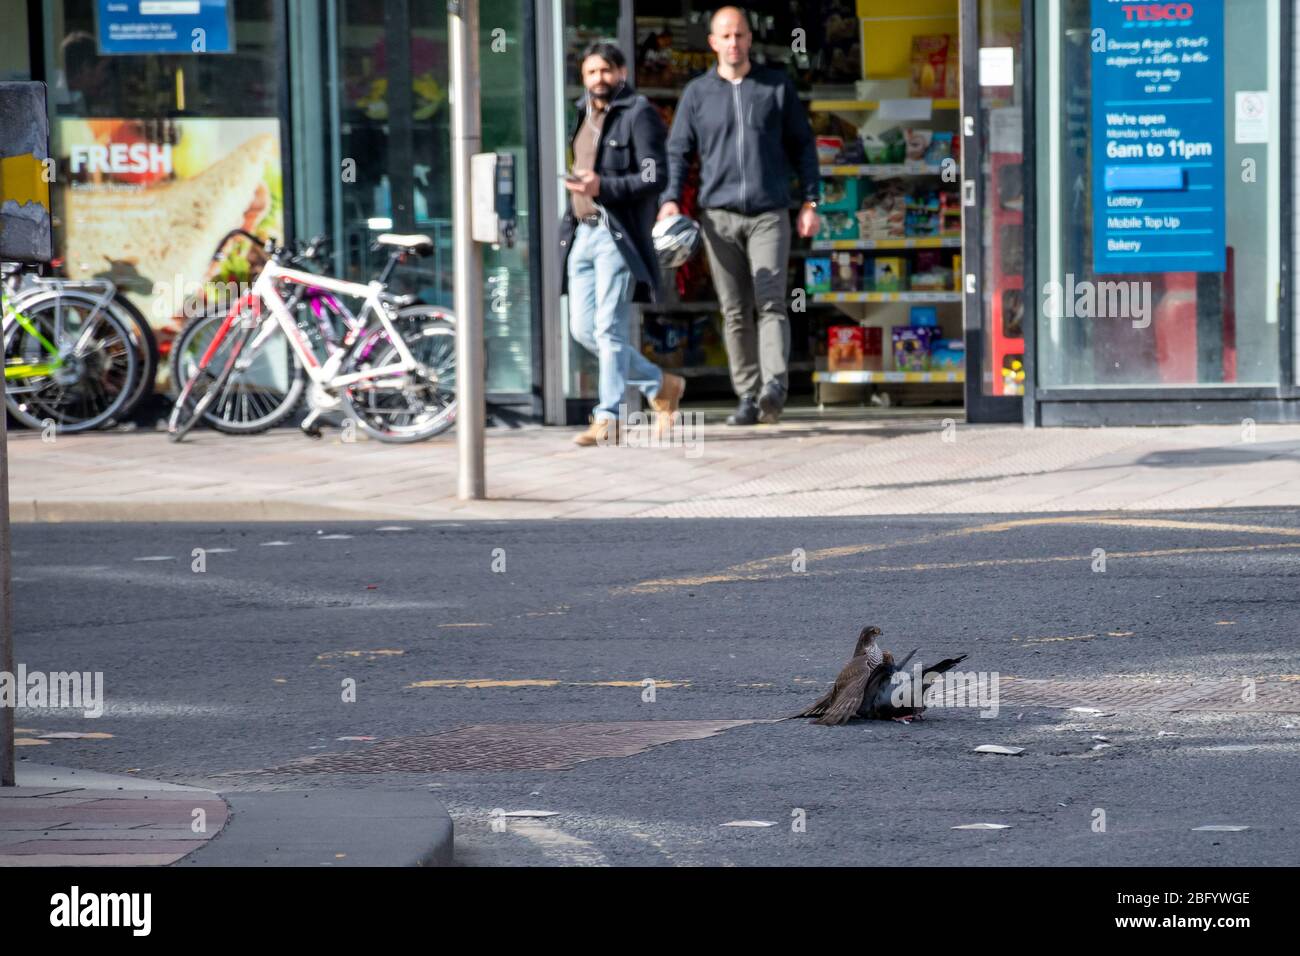 Bemused onlookers watch during the COVID-19 lockdown in Glasgow as a Sparrowhawk captures it's prey, a pigeon. Stock Photo